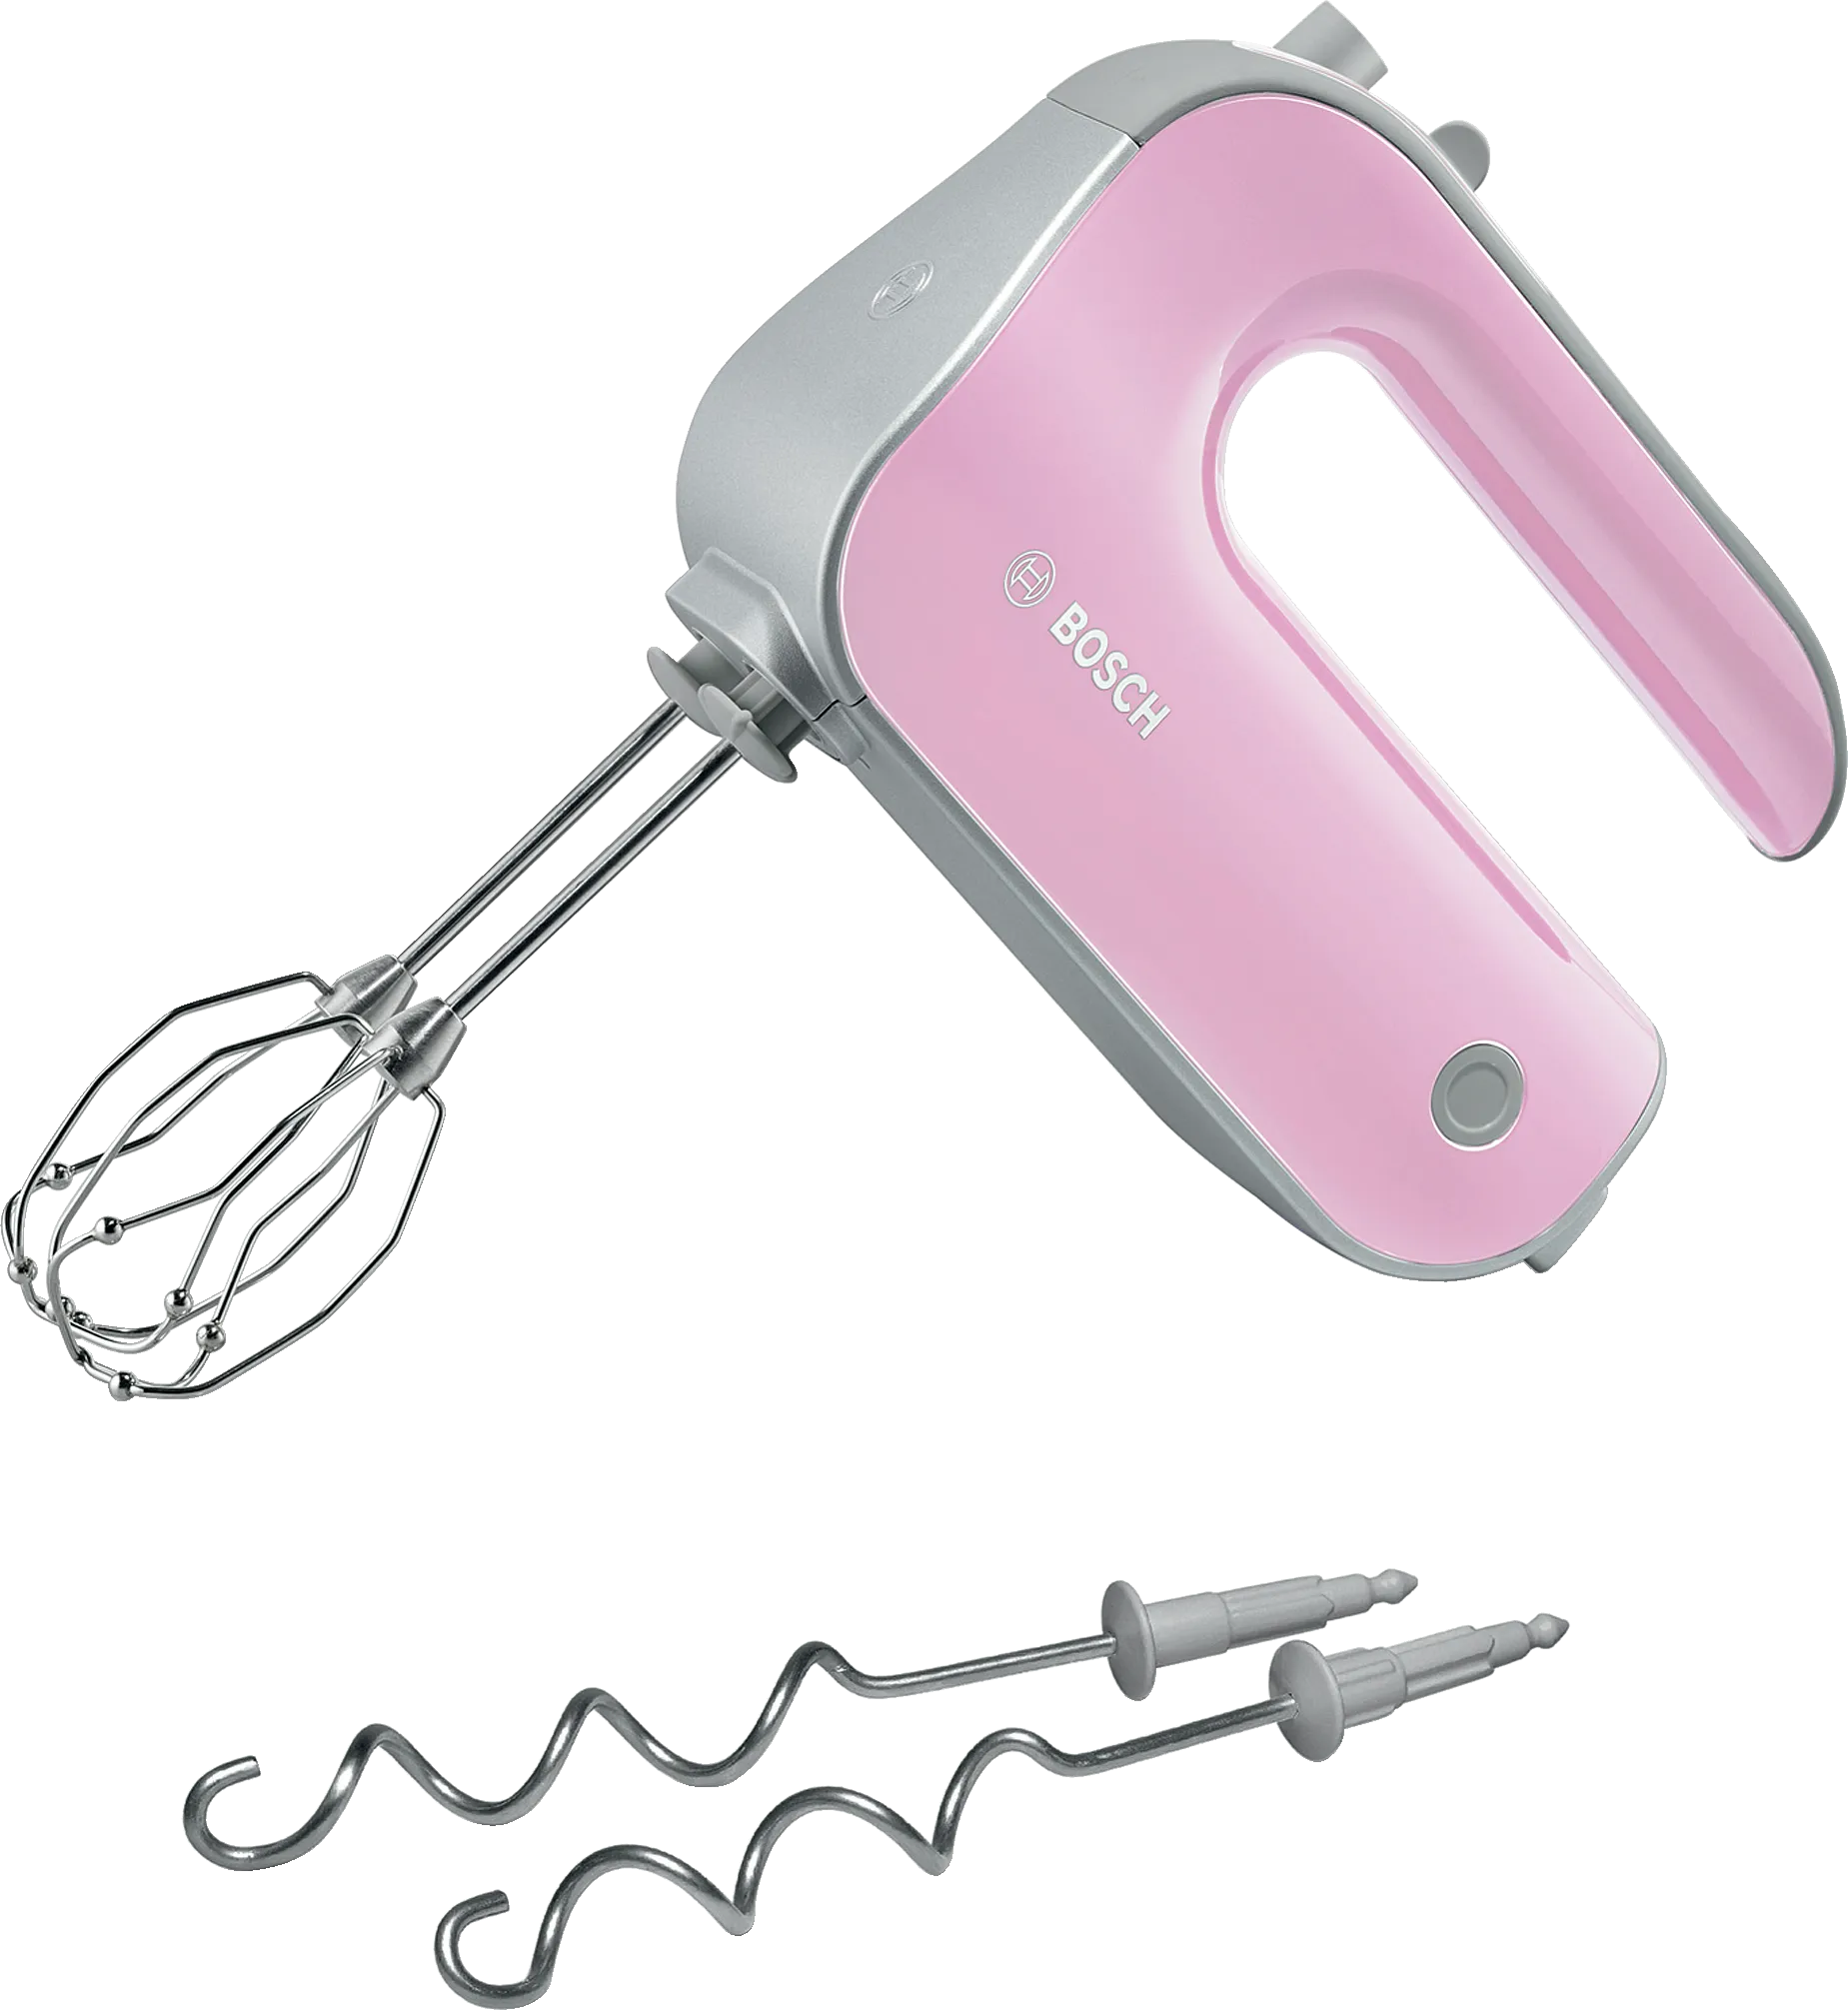 Hand mixer Styline Colour 500 W Pink, grey 